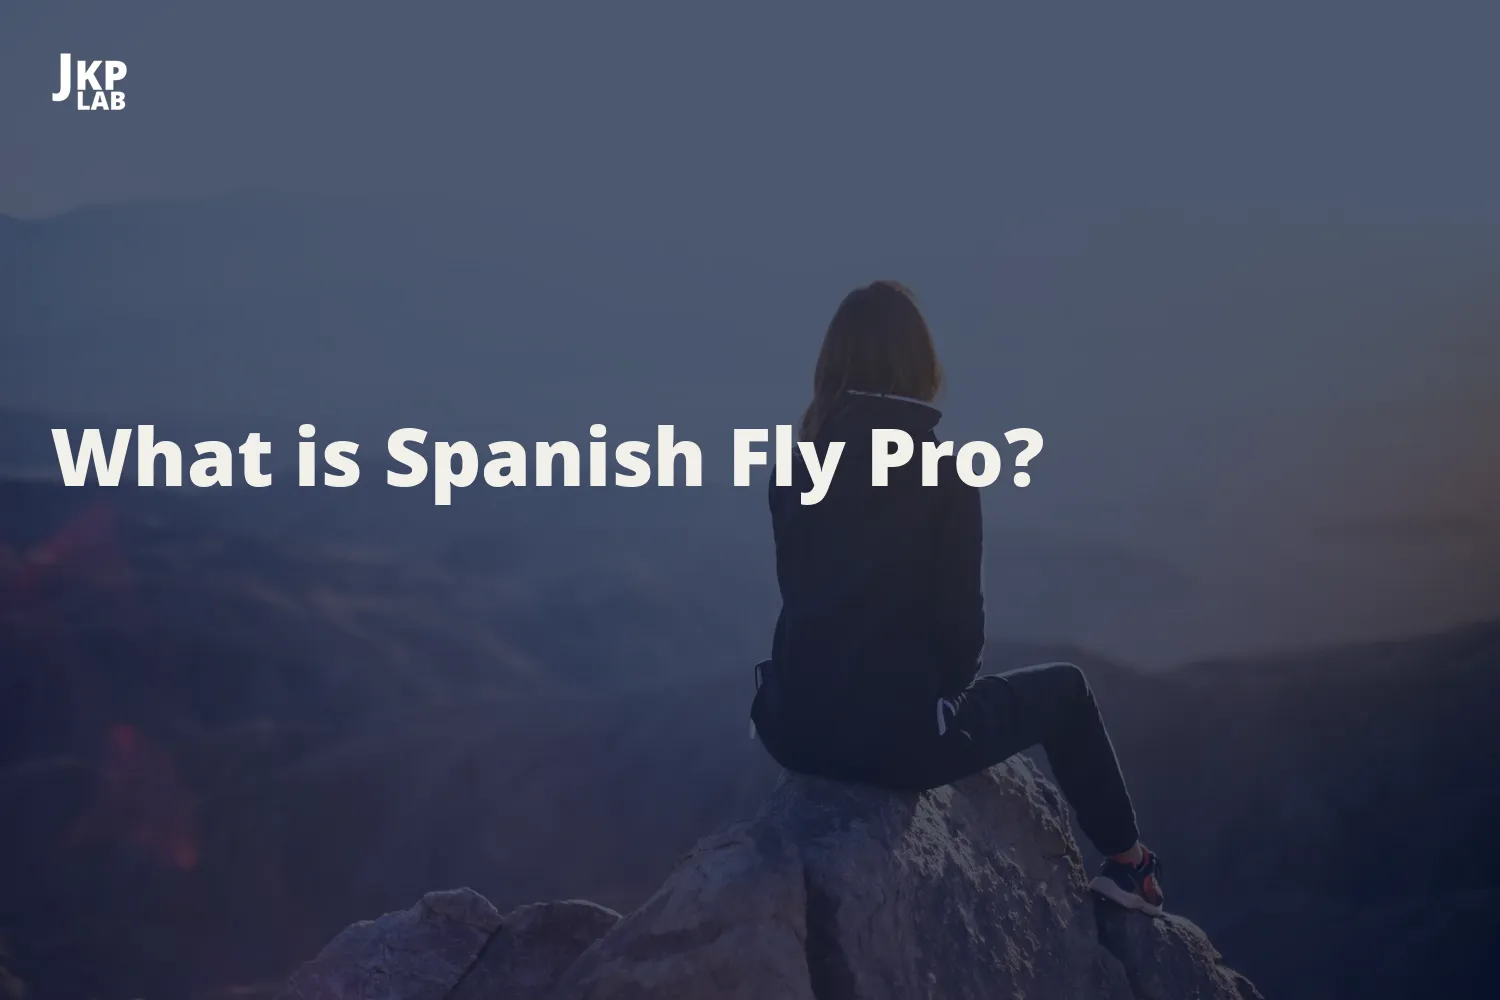 Public Perceptions and Myths about Spanish Fly